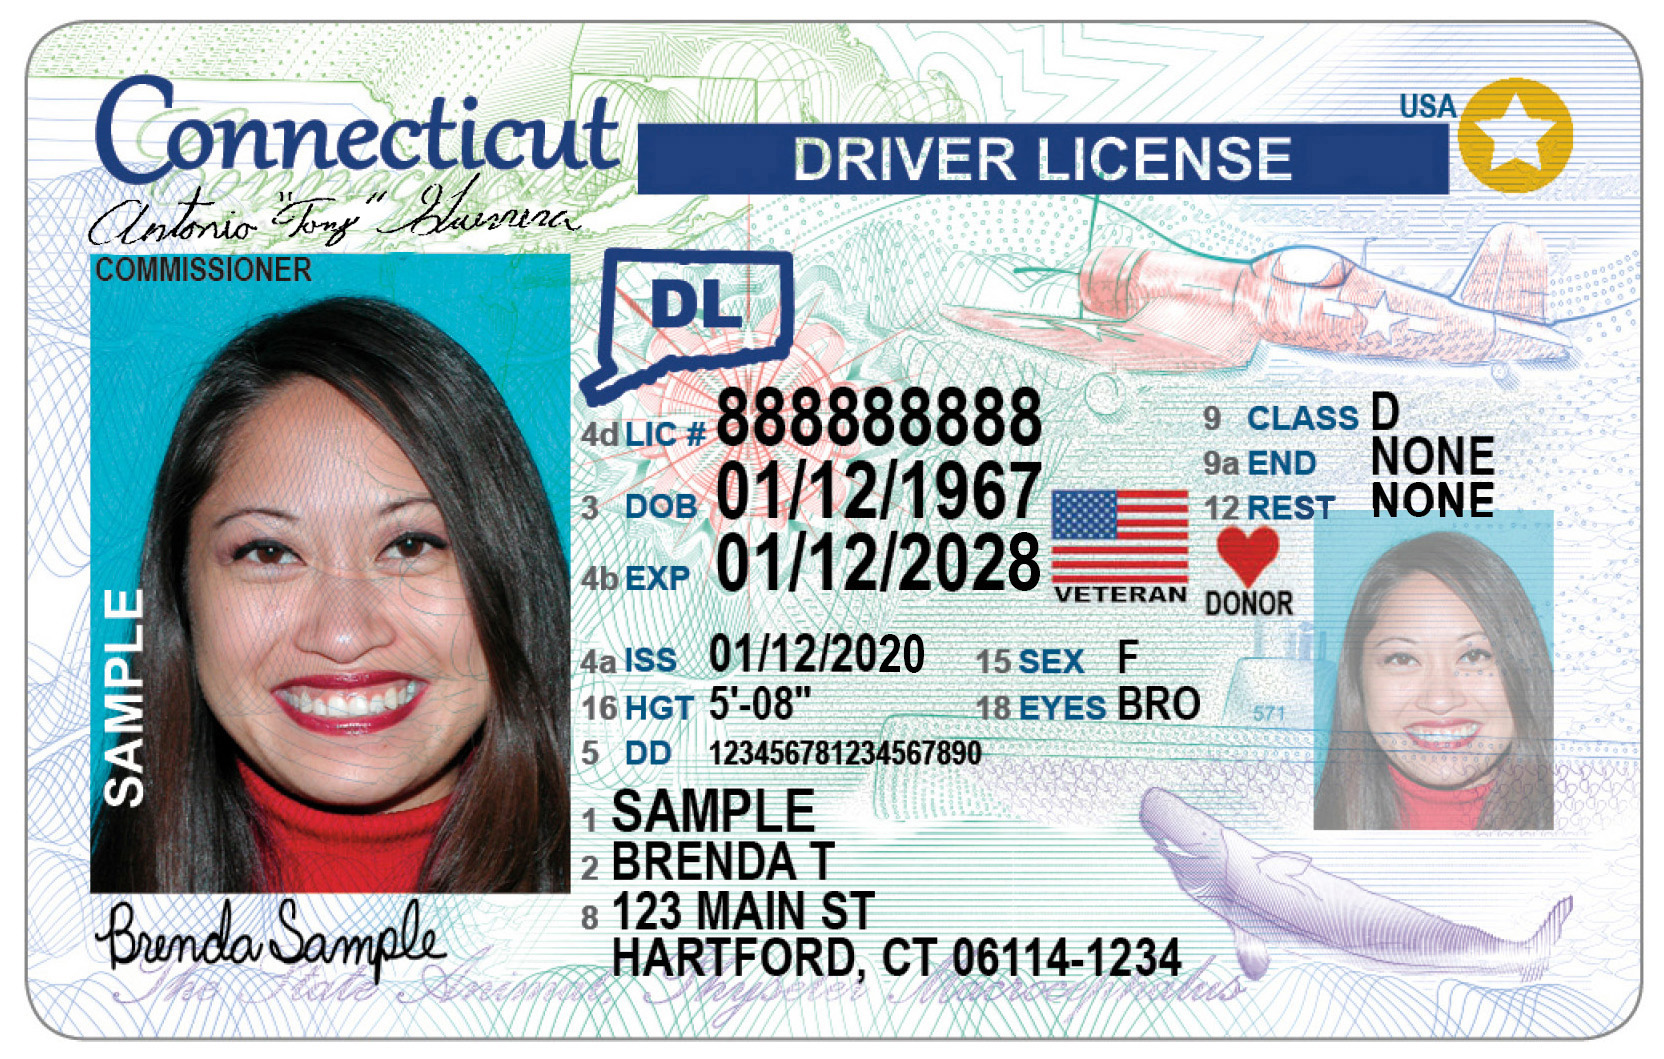 How To Get A New Mexico Fake Id